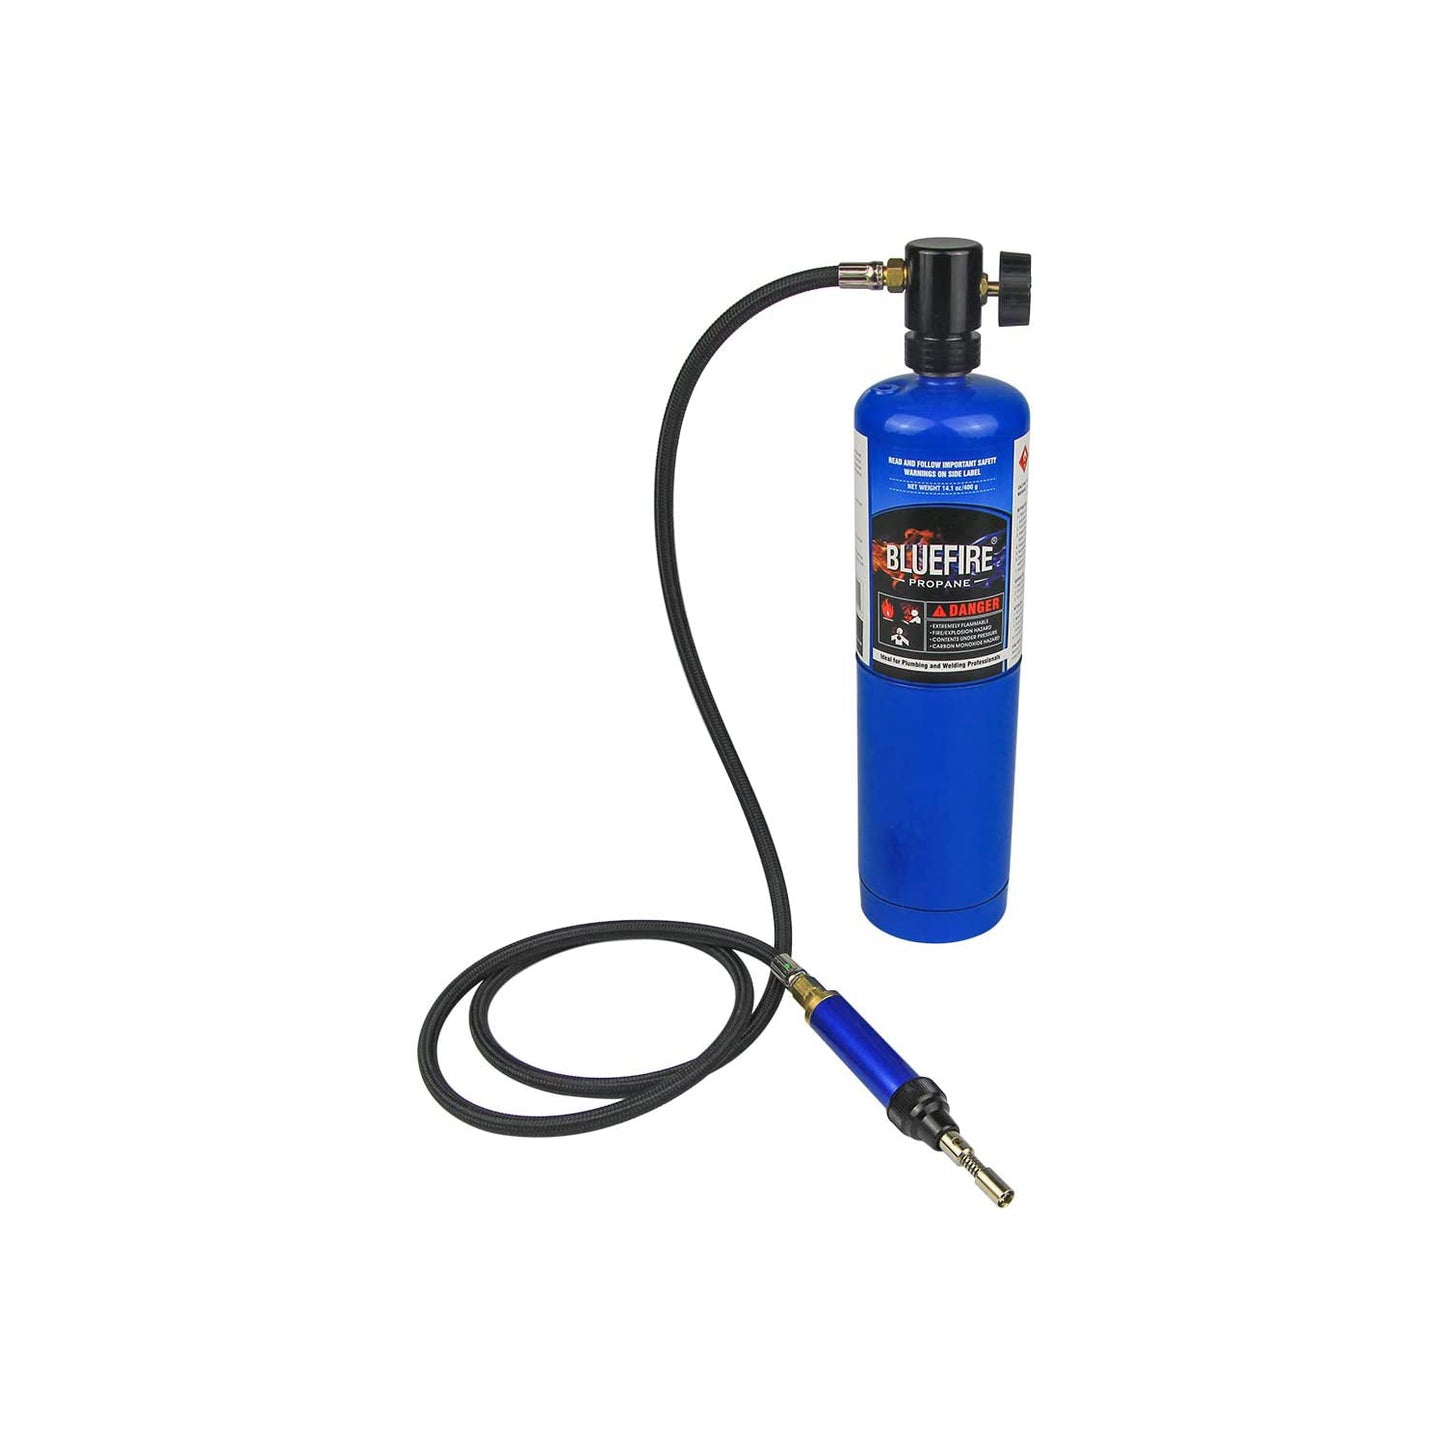 HT-1933 Propane / MAP Gas Soldering Torch Head with 3' Hose | Self-Igniting Welding Station with Adjustable Flame